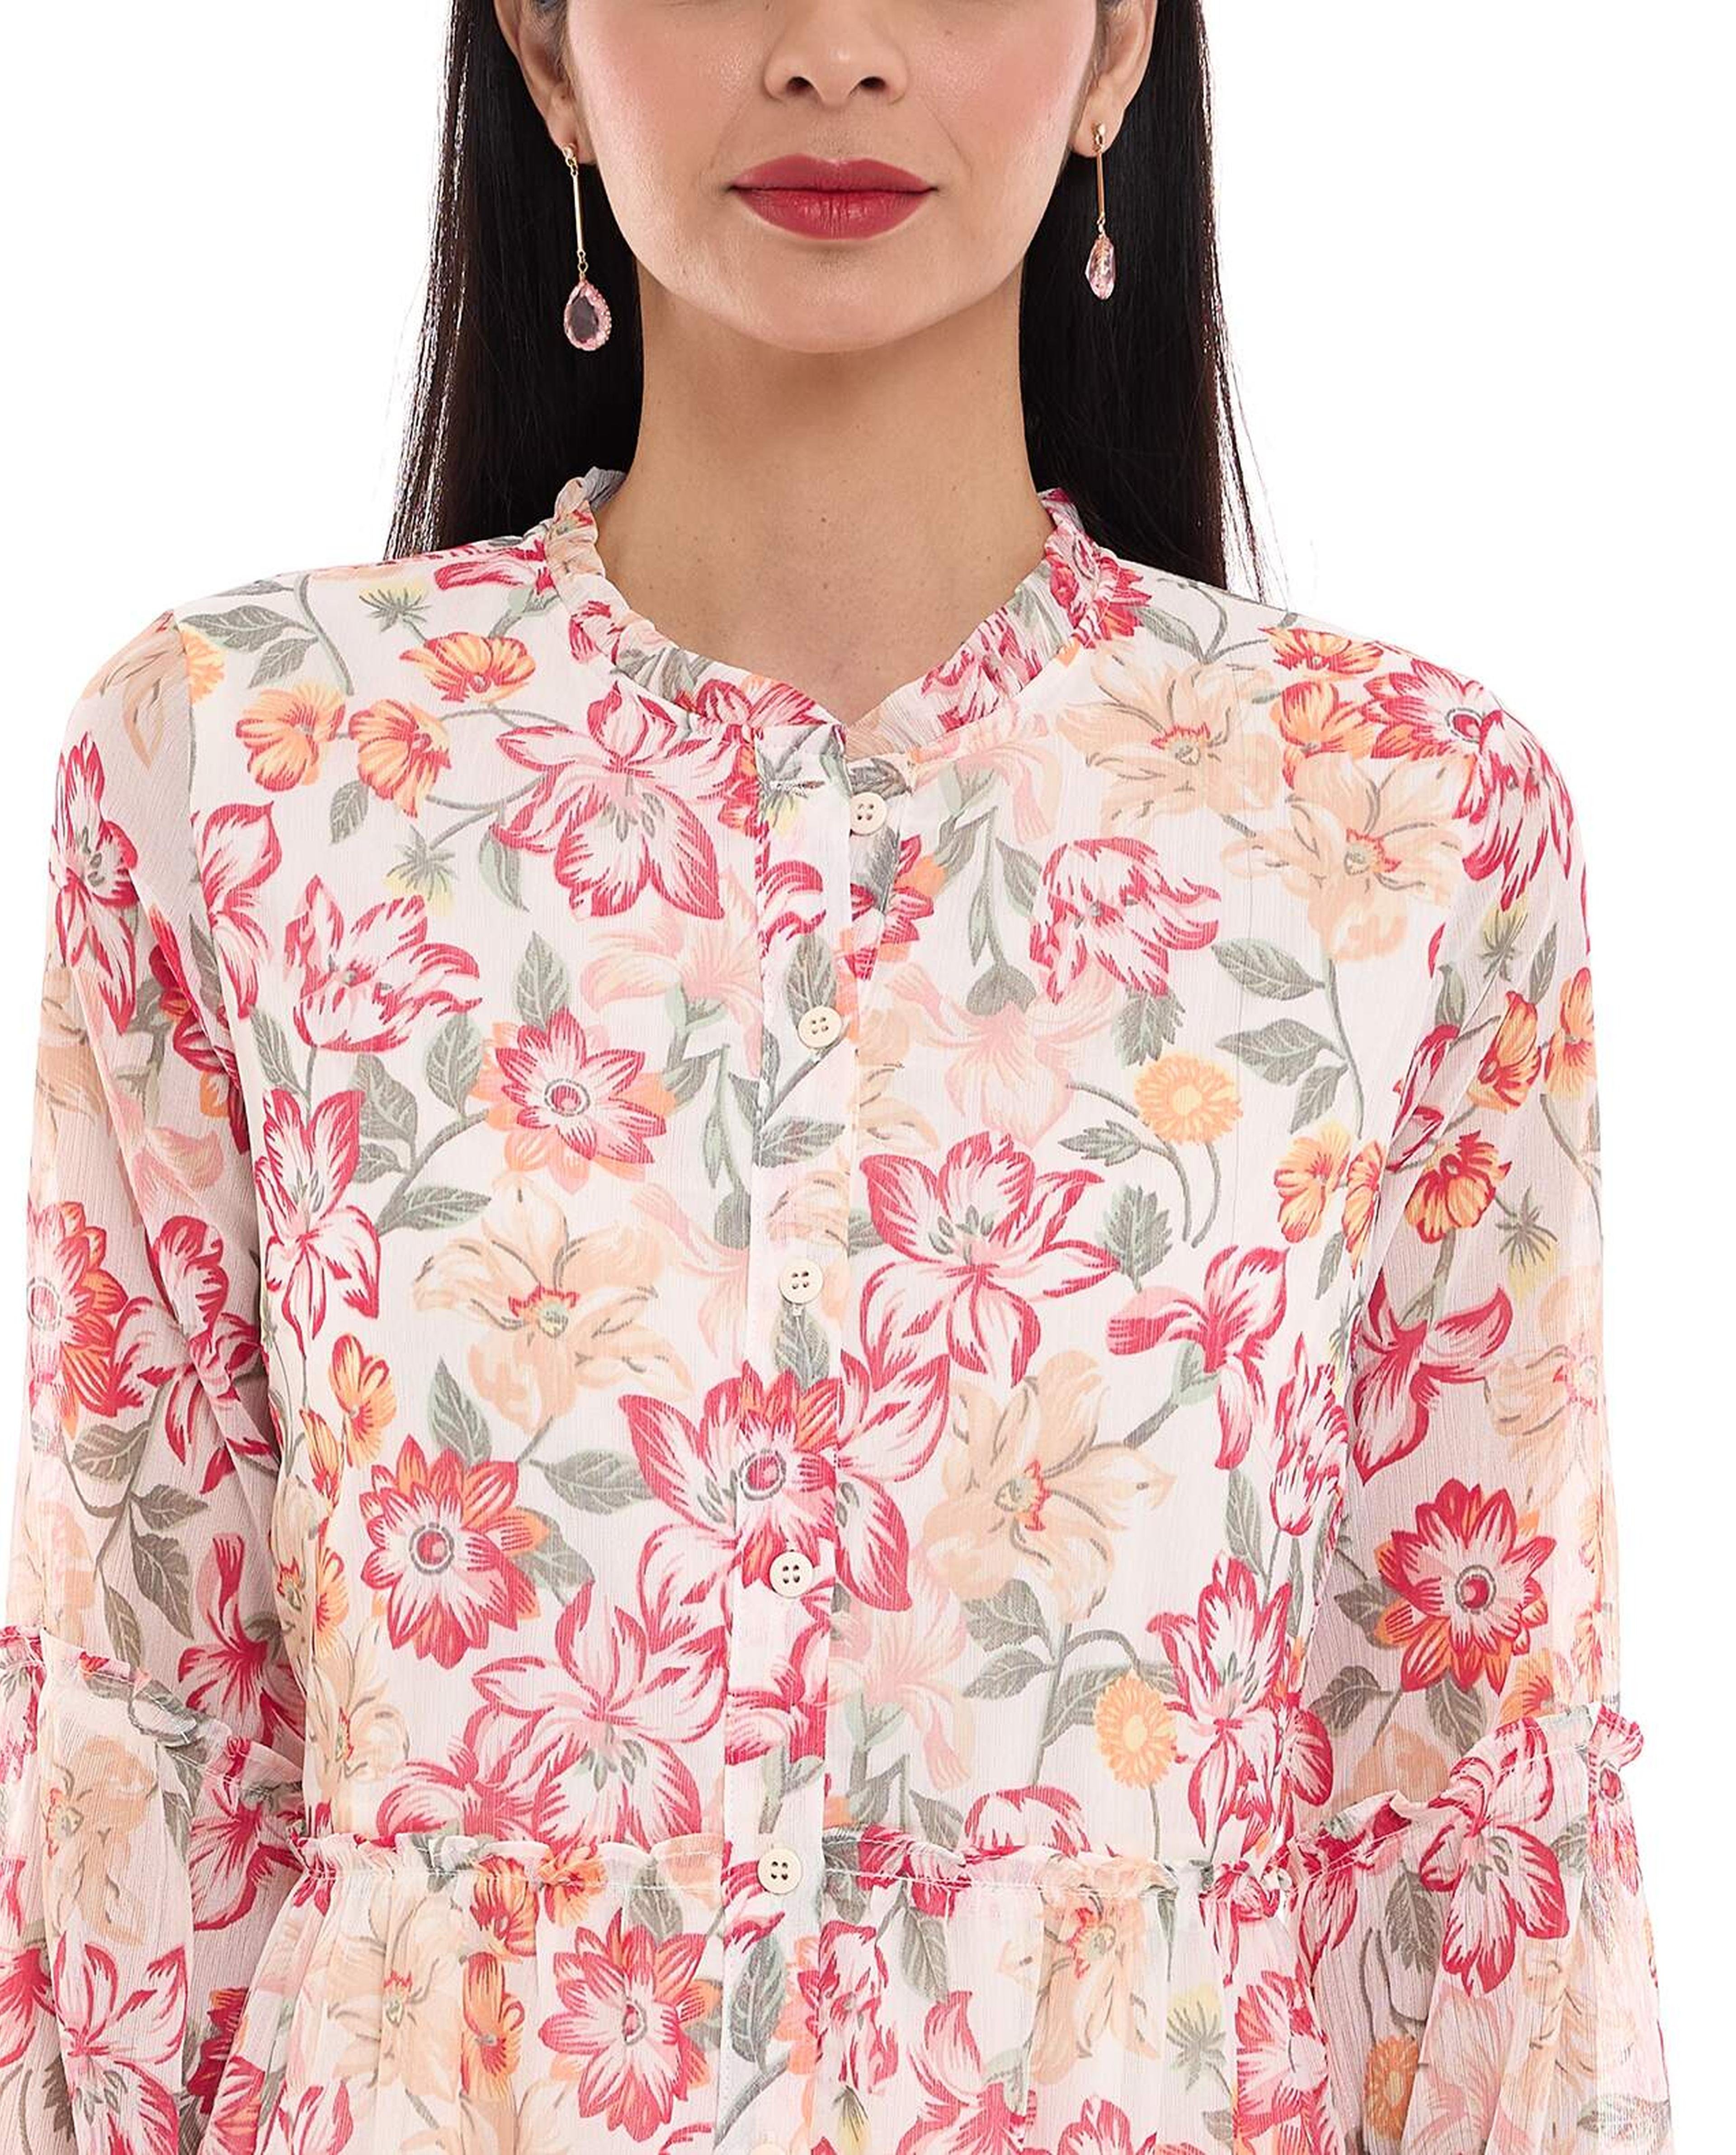 Floral Patterned Dress with Crew Neck and Long Sleeves